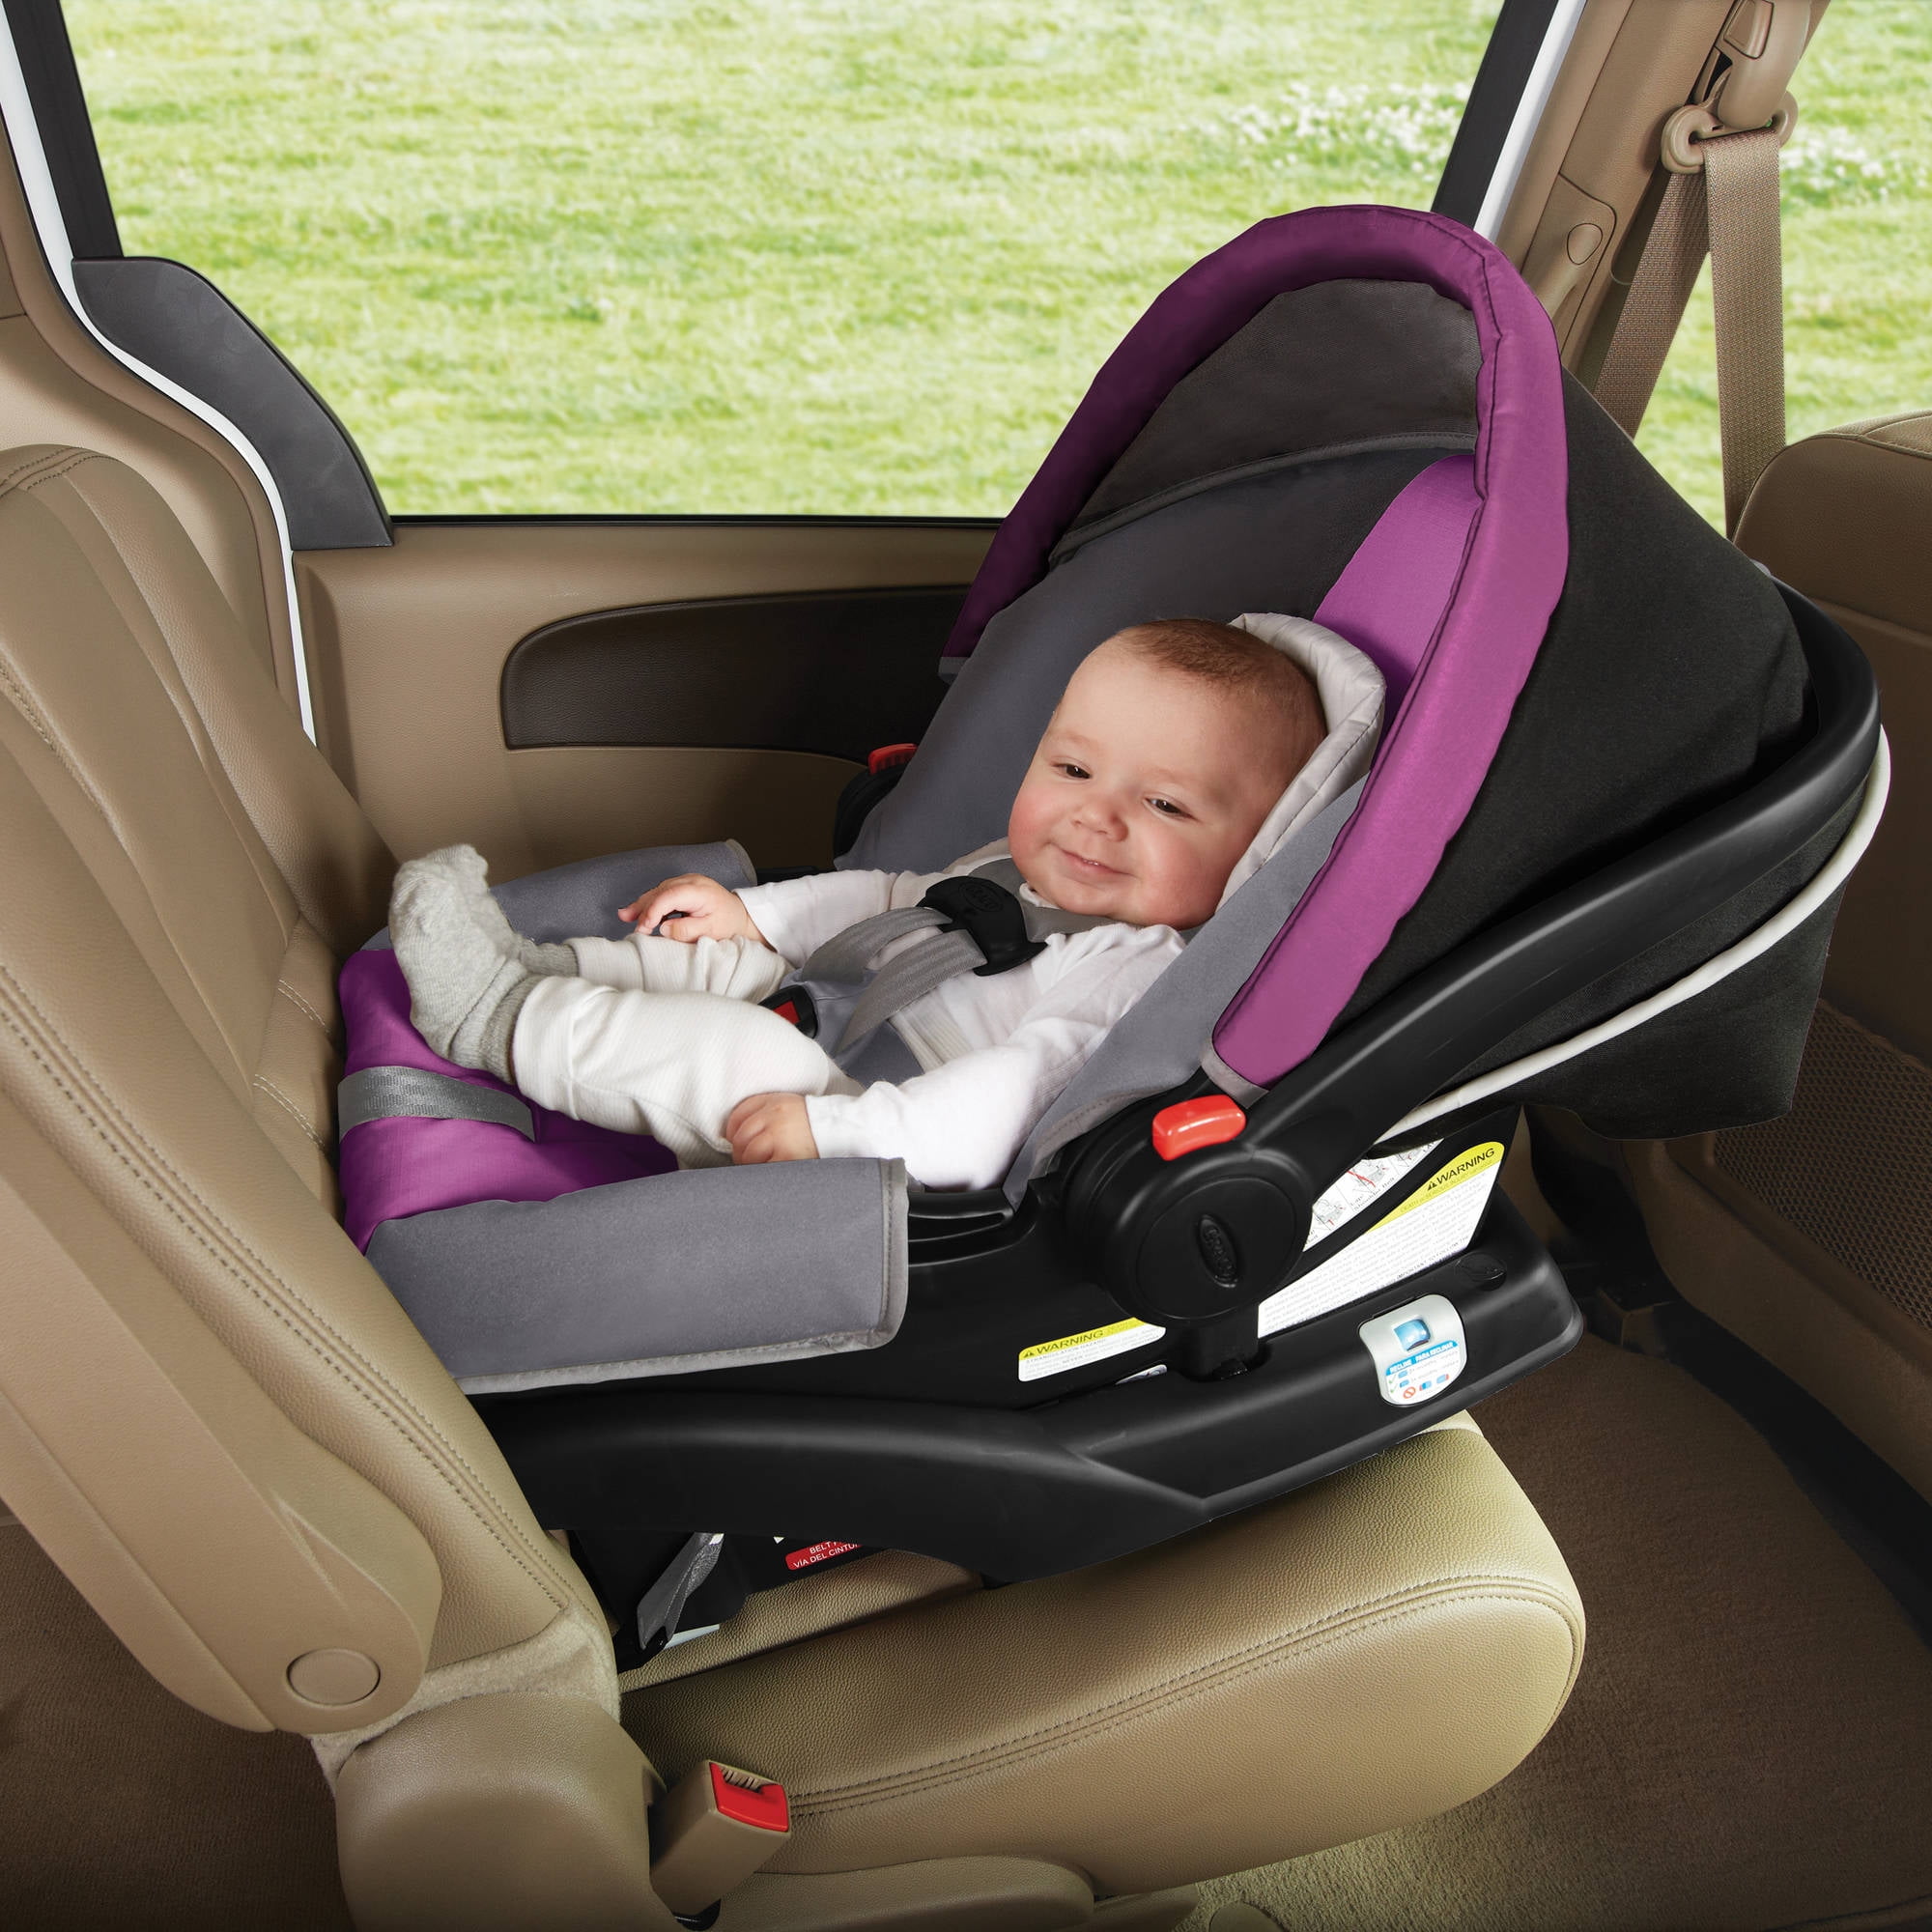 types of car seats for infants